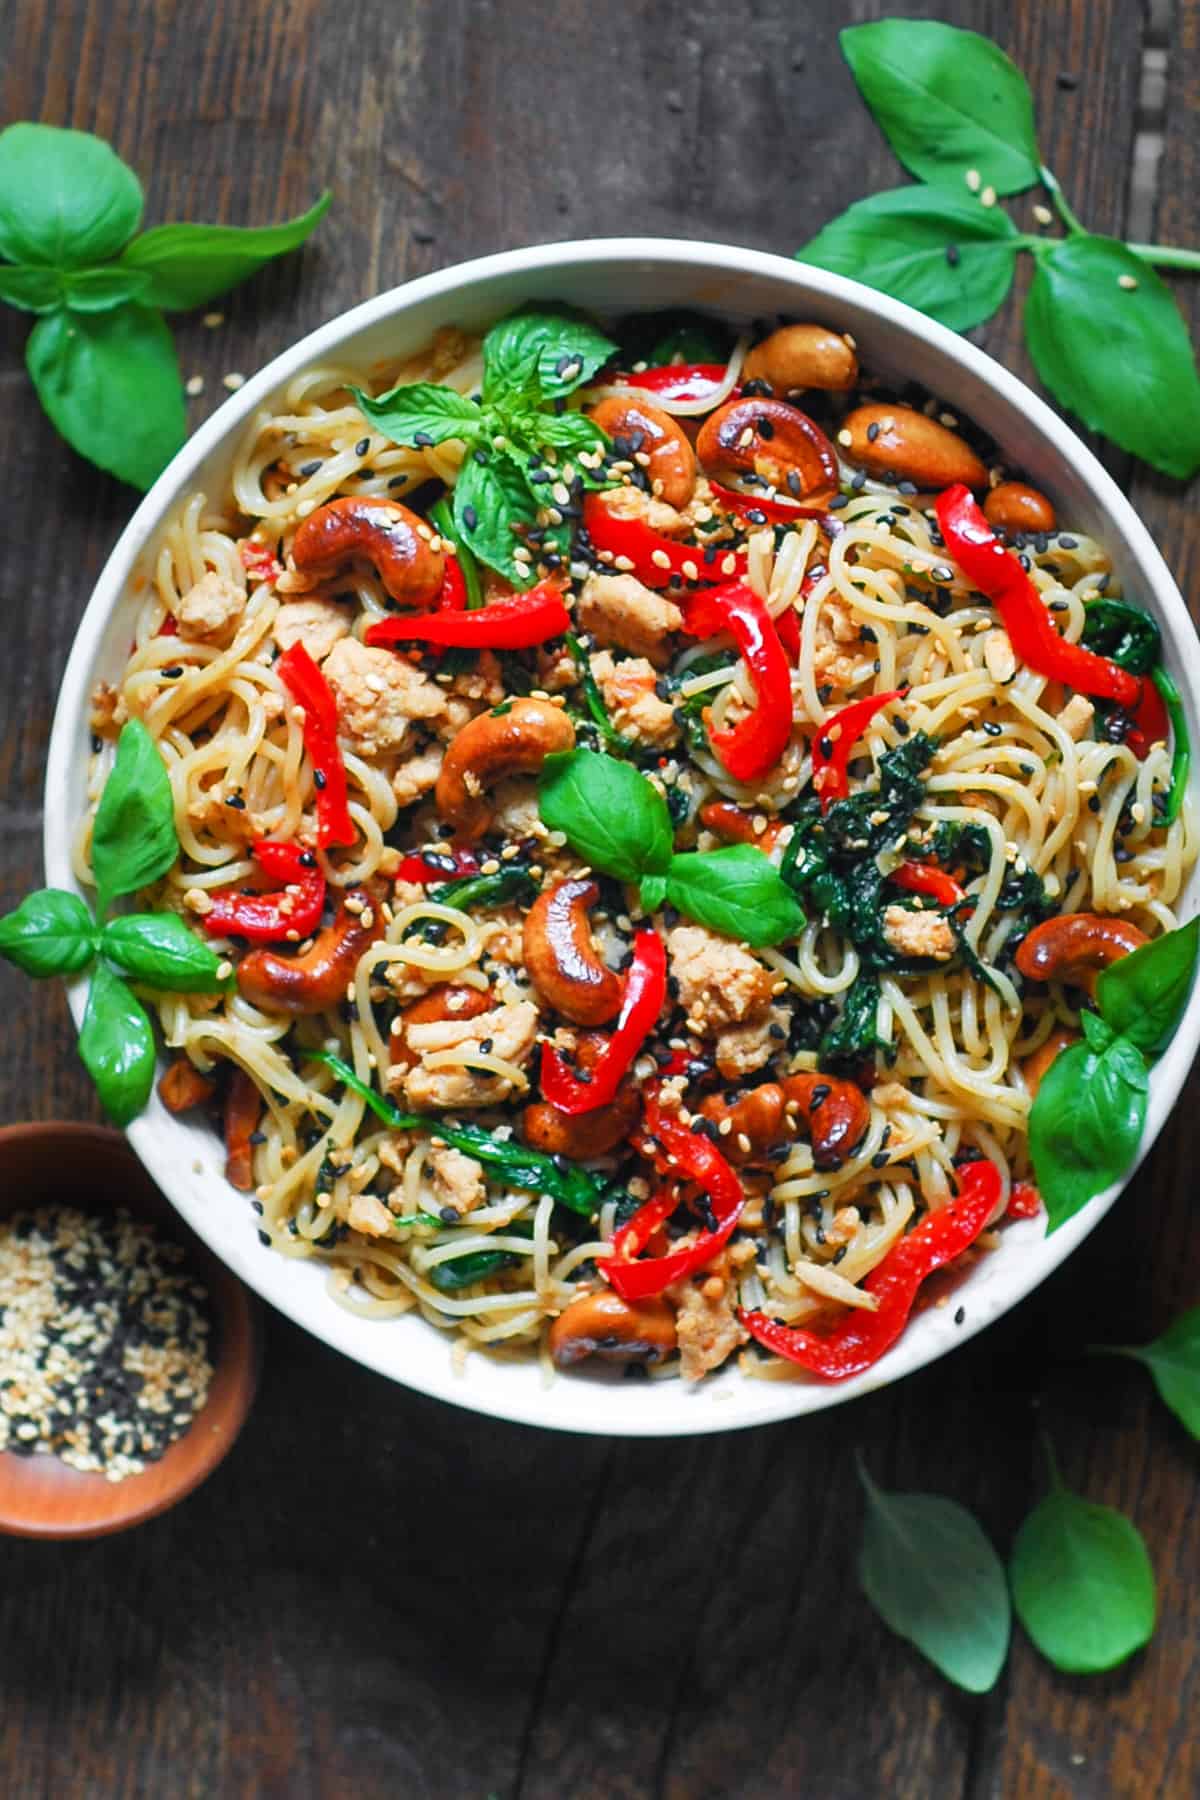 Chicken Ramen Noodles with Bell Peppers, Spinach, Cashews, and Sesame Seeds - in a white bowl.